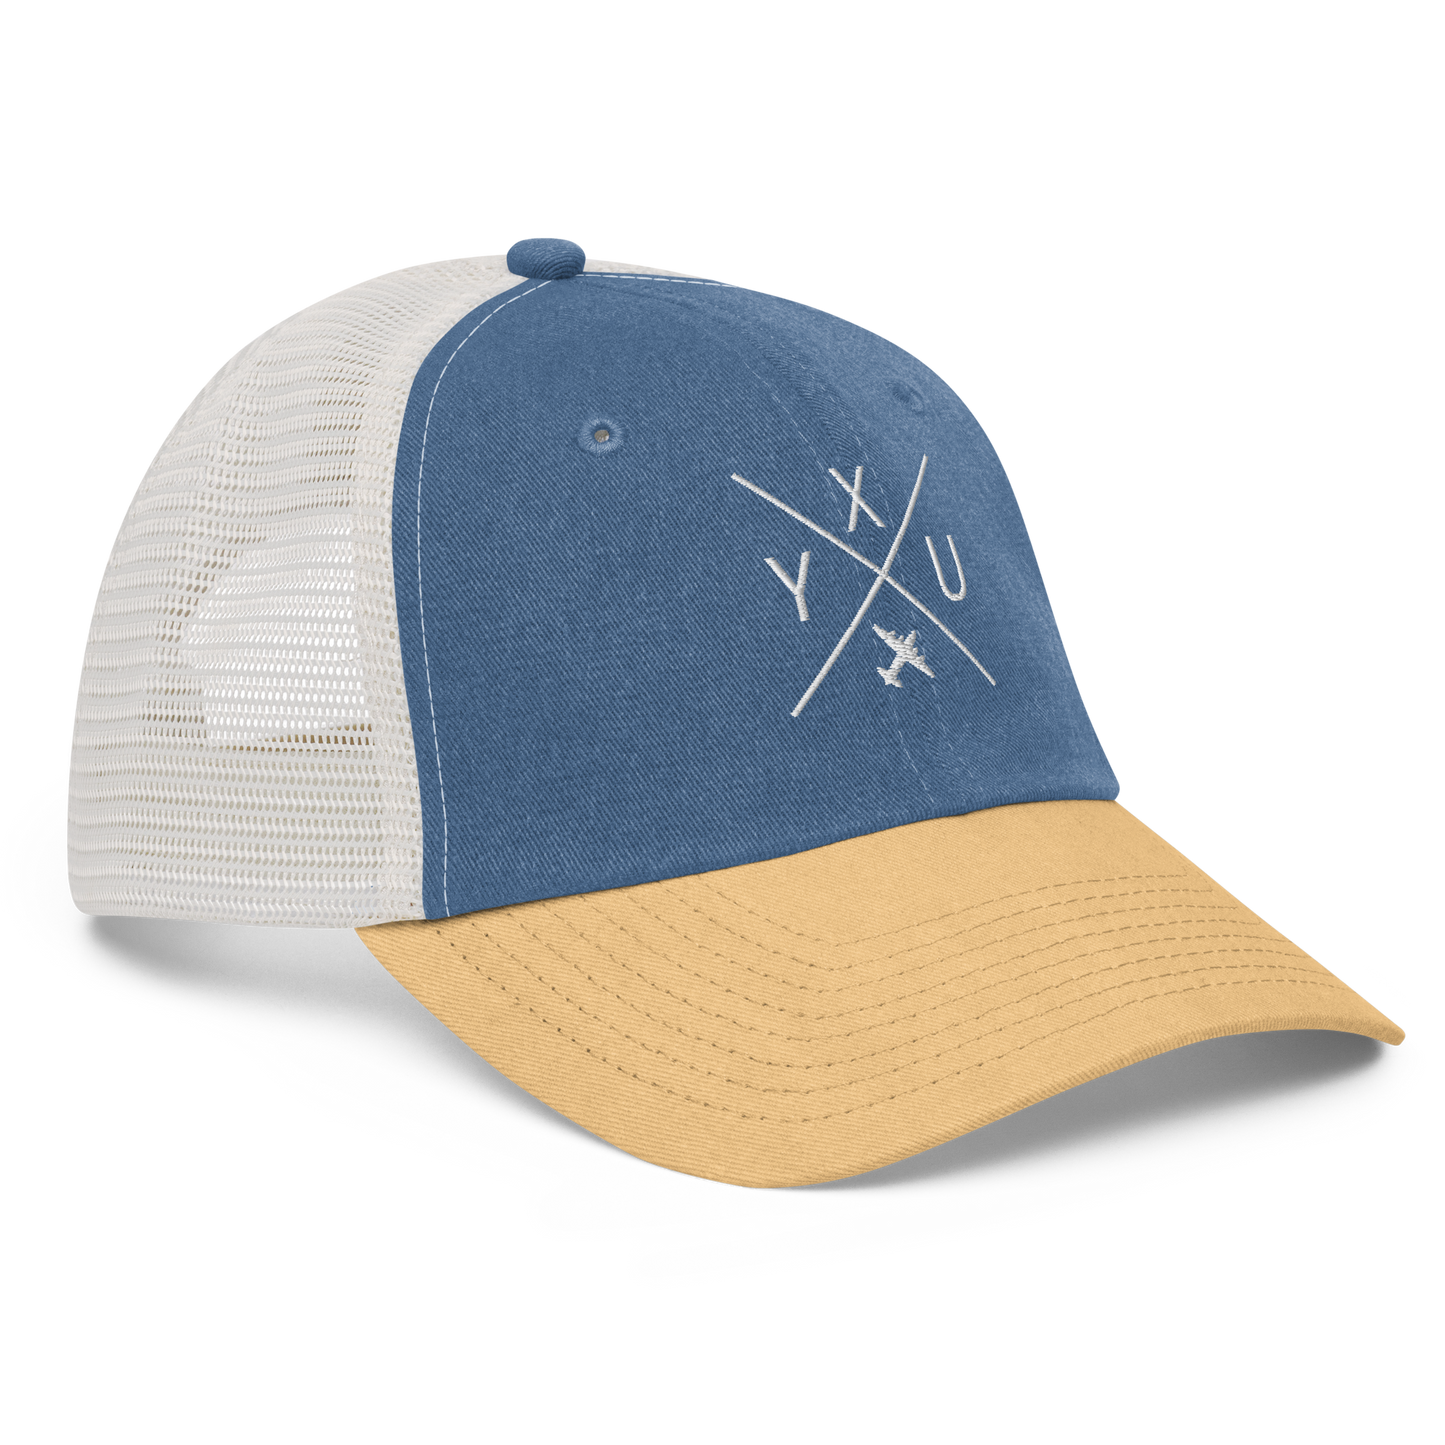 YHM Designs - YXU London Pigment-Dyed Trucker Cap - Crossed-X Design with Airport Code and Vintage Propliner - White Embroidery - Image 18